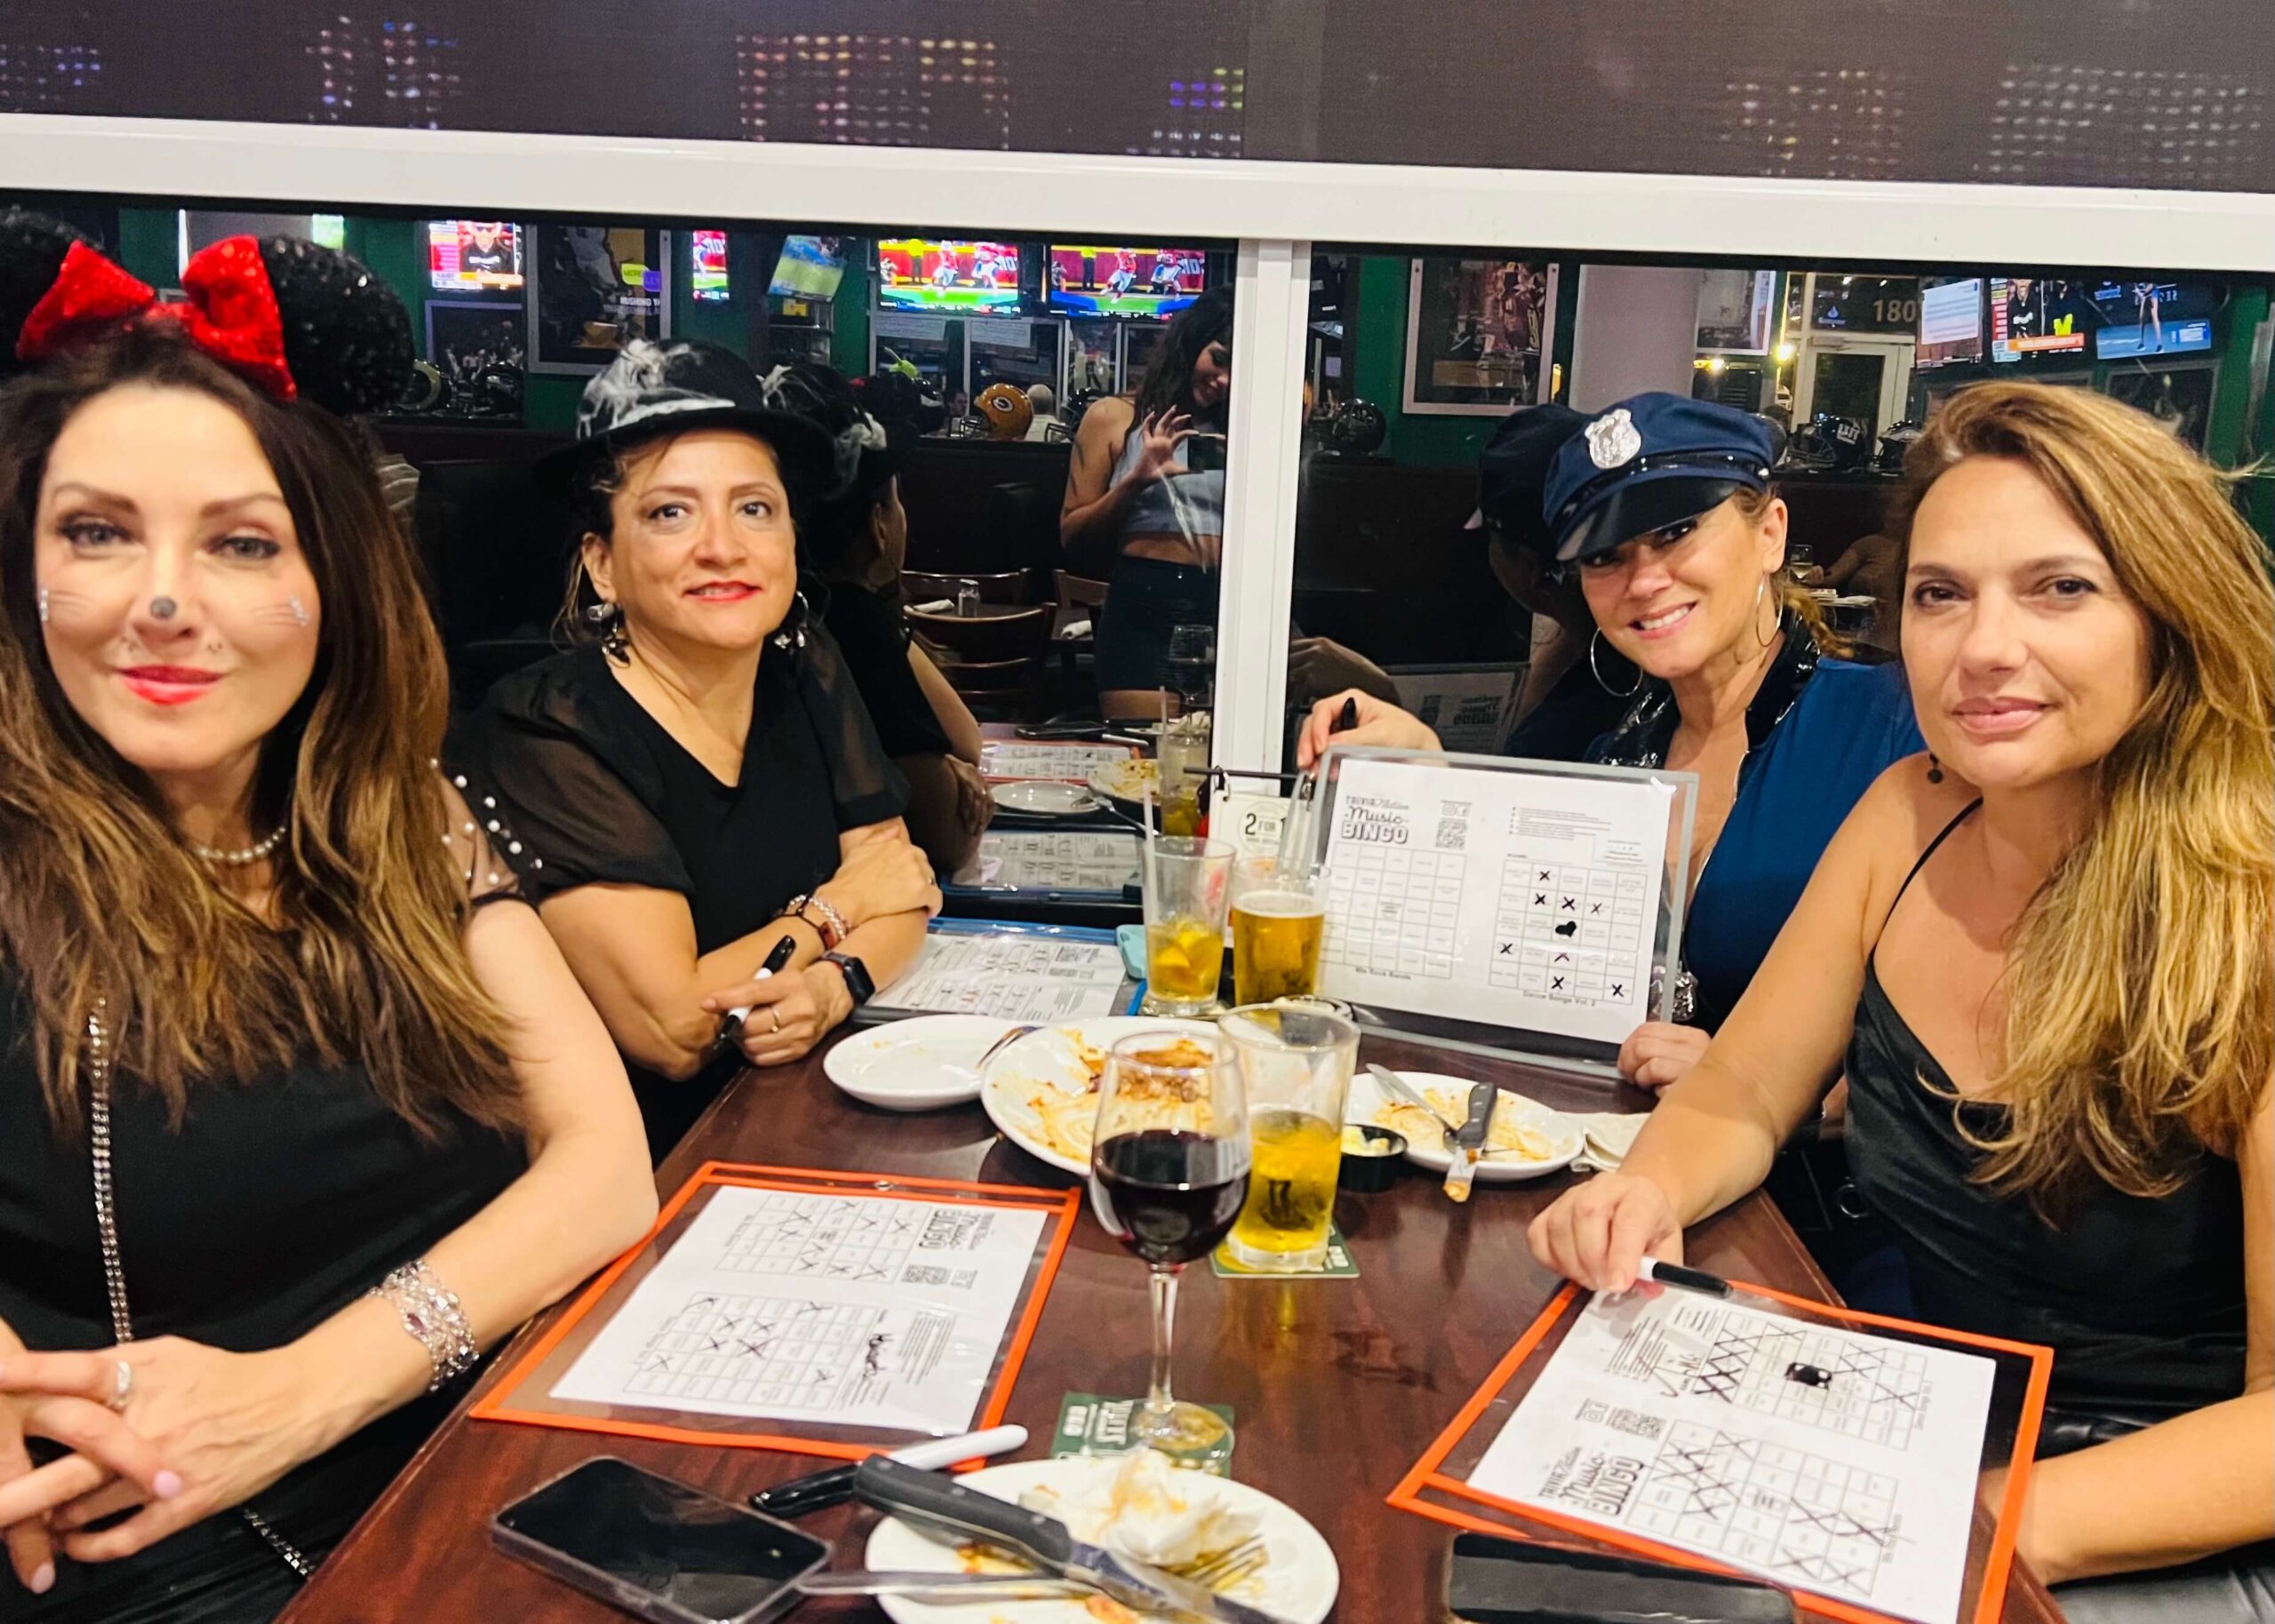 Duffy's Sports Grill Weston FL 33326 trivia night: group of four middle-aged attractive women seated at a table with music bingo cards and beer and wine on the table with three of the women wearing costumes for Halloween